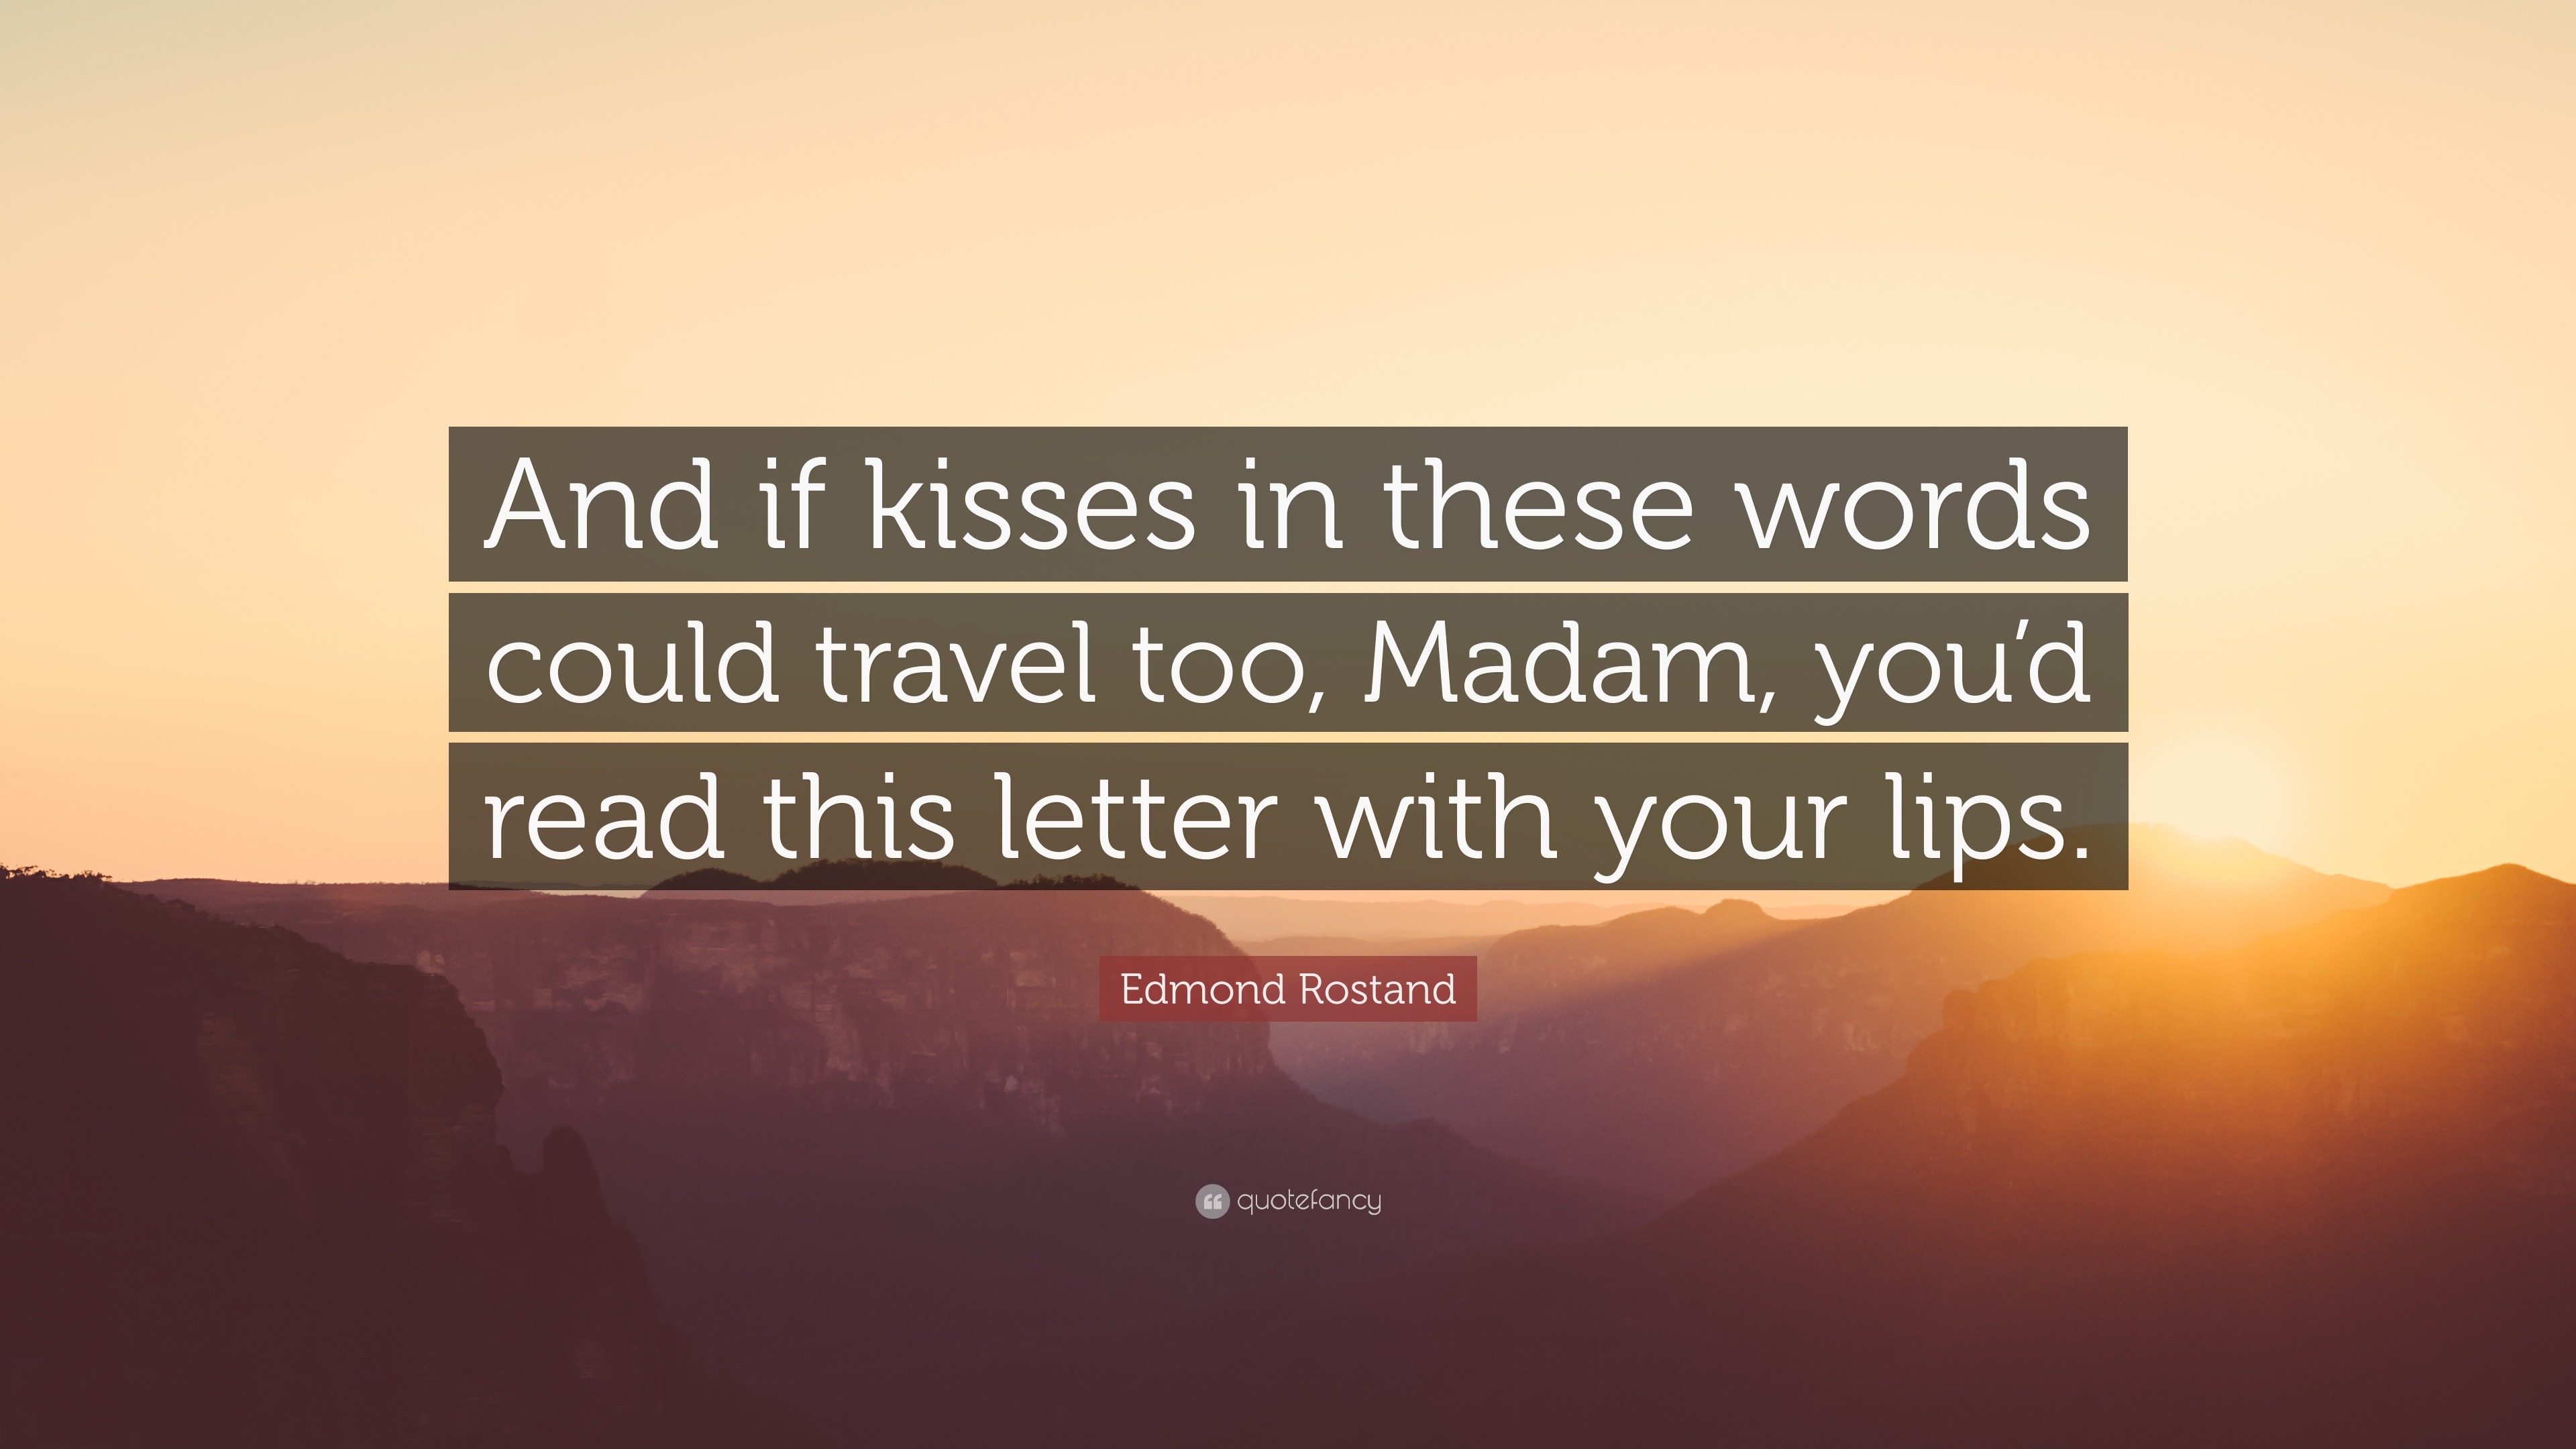 Edmond Rostand Quote And If Kisses In These Words Could Travel Too Madam You D Read